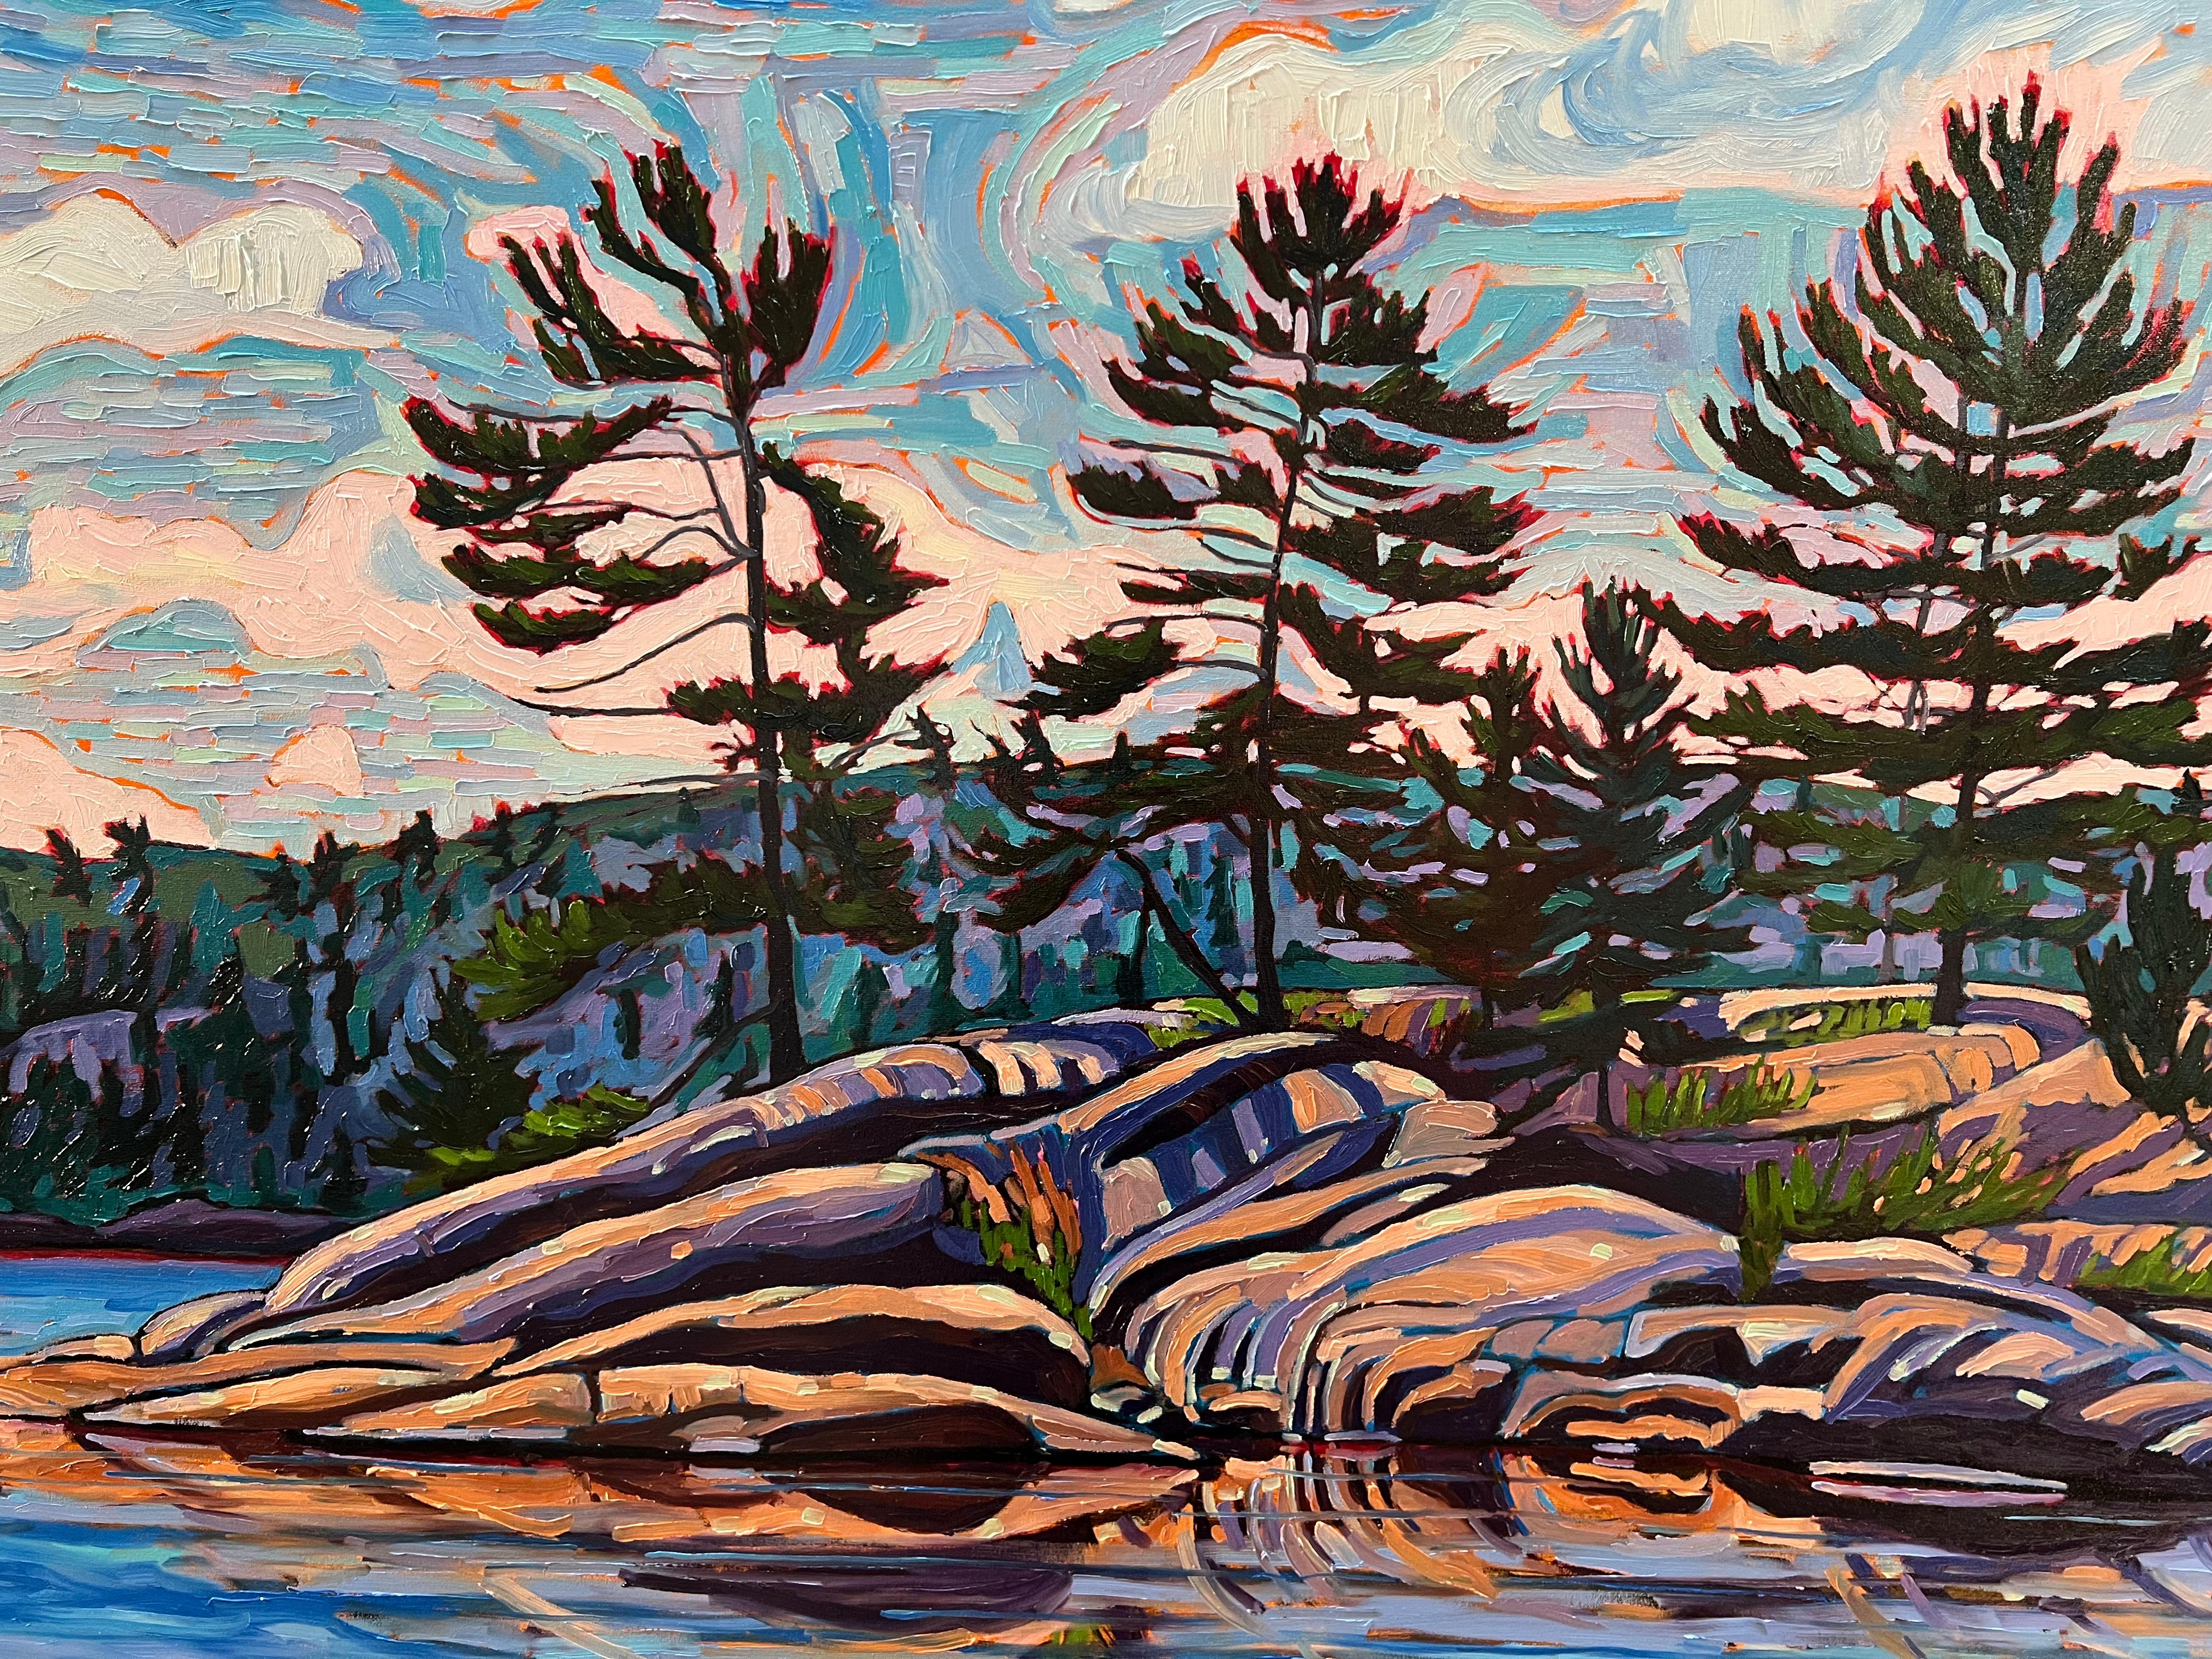 Spirit of The Lake, Killarney pink Canadian cottage lake scene, oil, 2022 - Painting by Nancy Yanaky